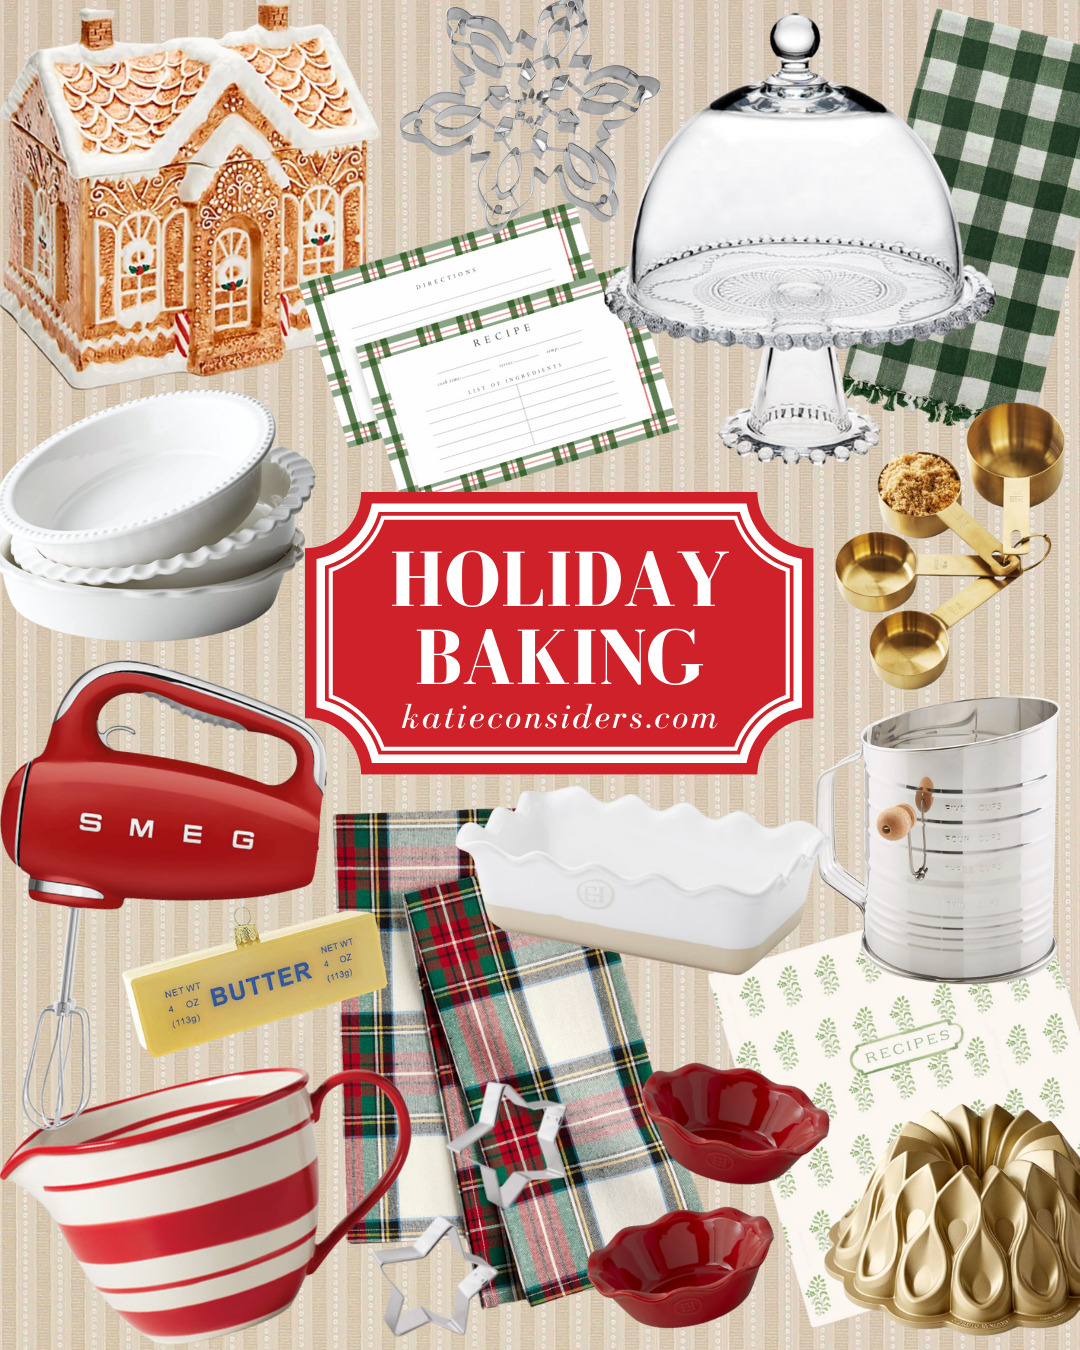 http://katieconsiders.com/wp-content/uploads/2021/12/holiday-baking-cooking-gift-guide-katie-considers-christmas.jpg